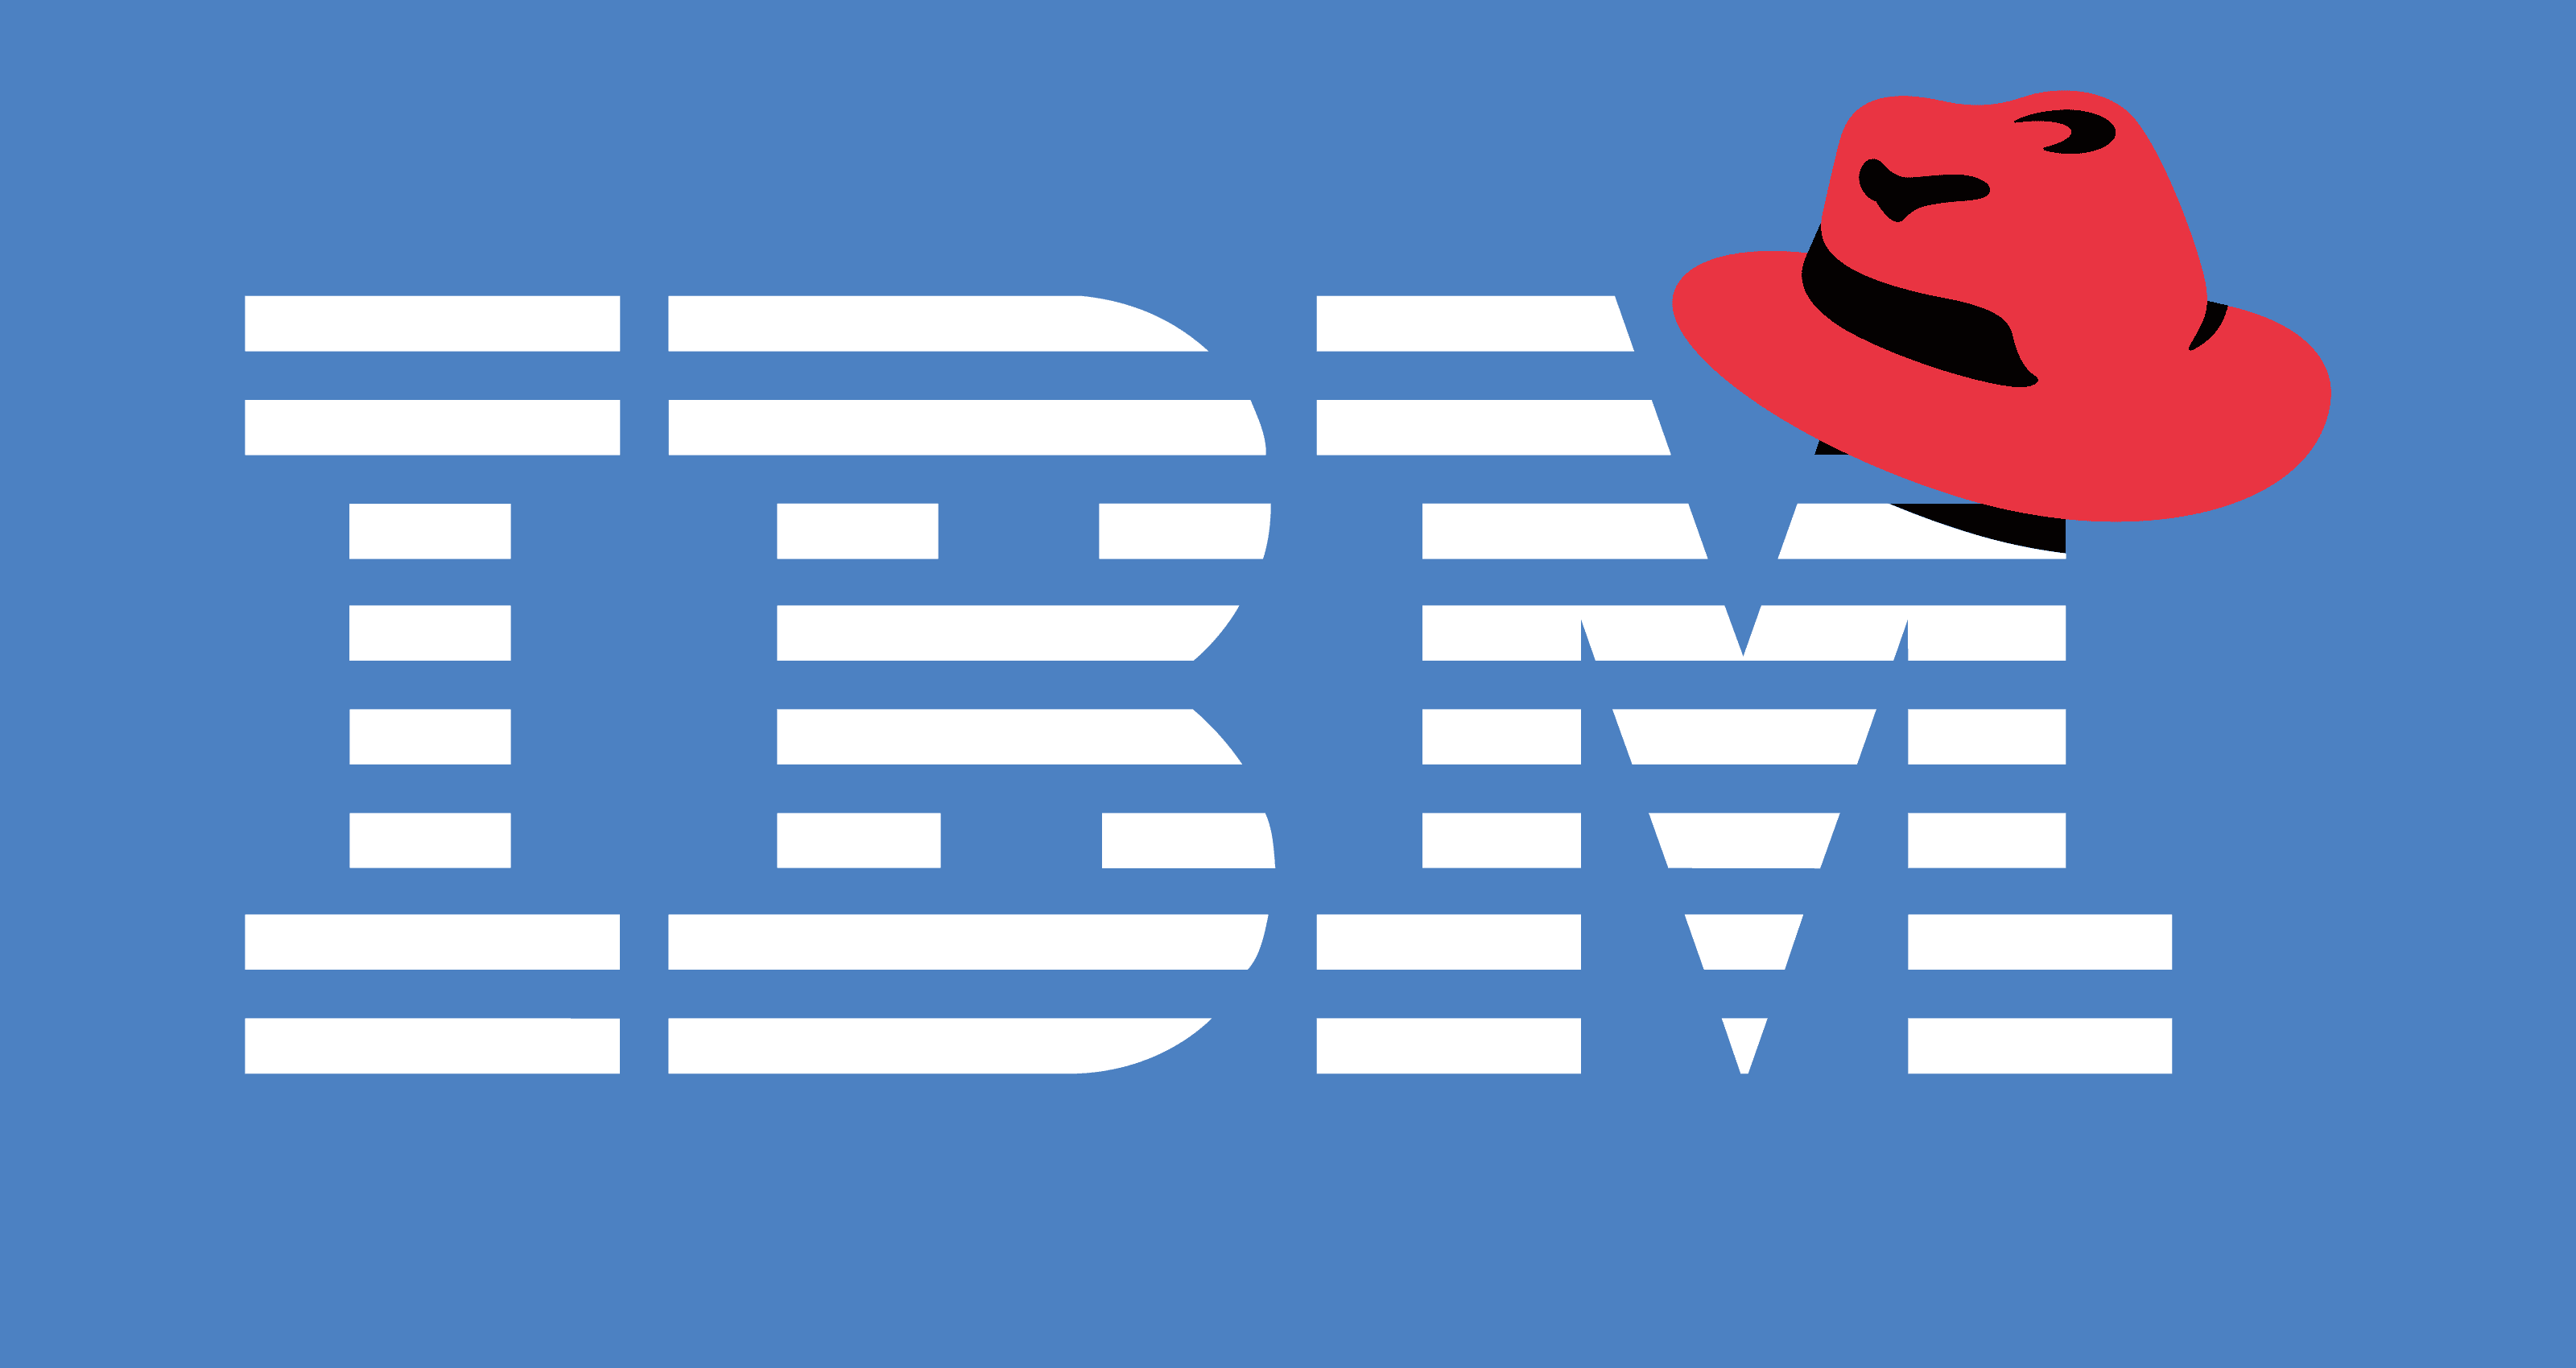 IBM accuired Red Hat for $34 billion